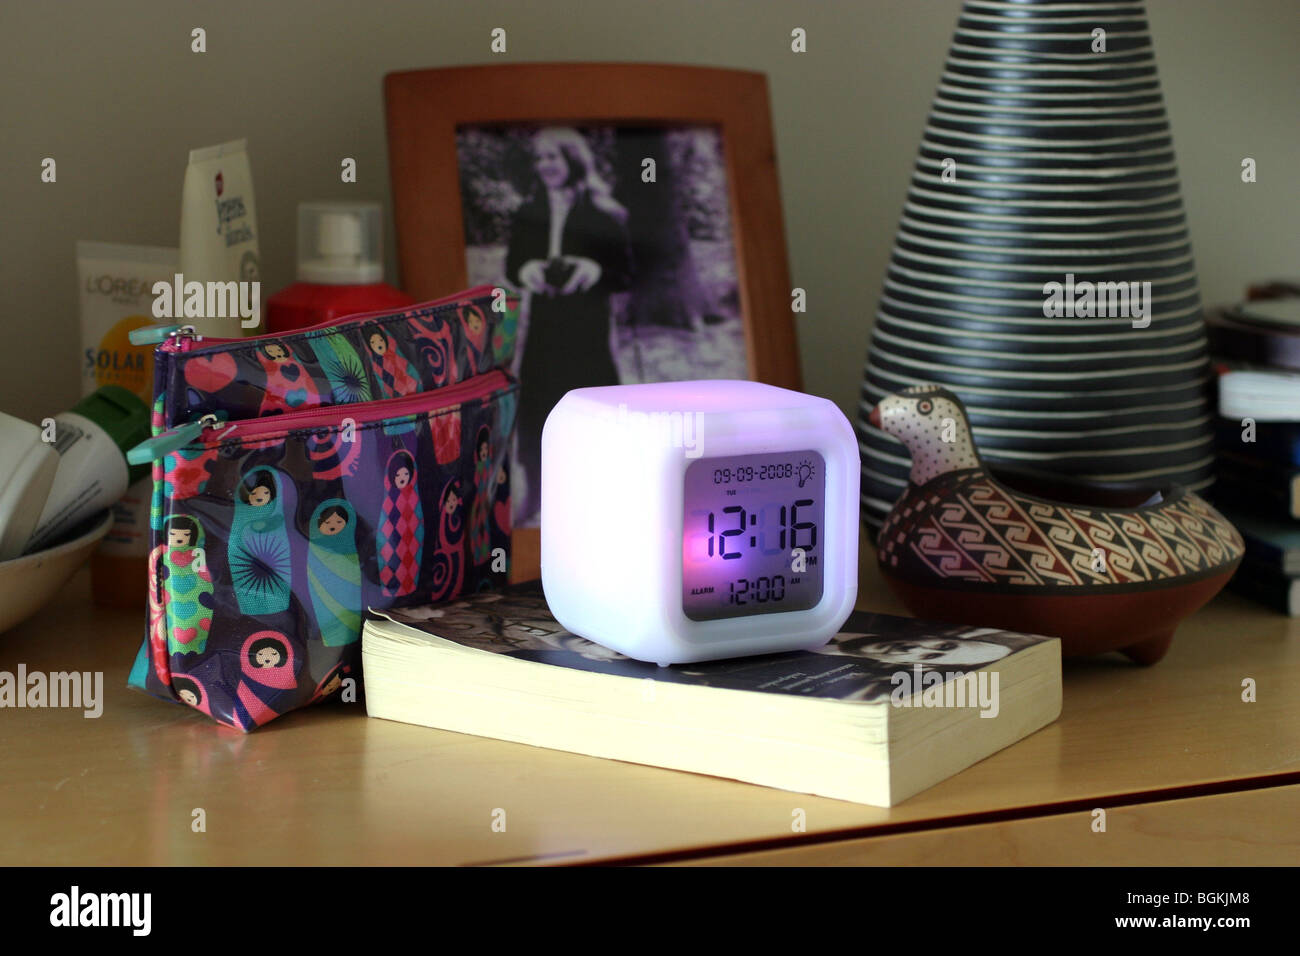 Alarm clock on a bedside table Stock Photo